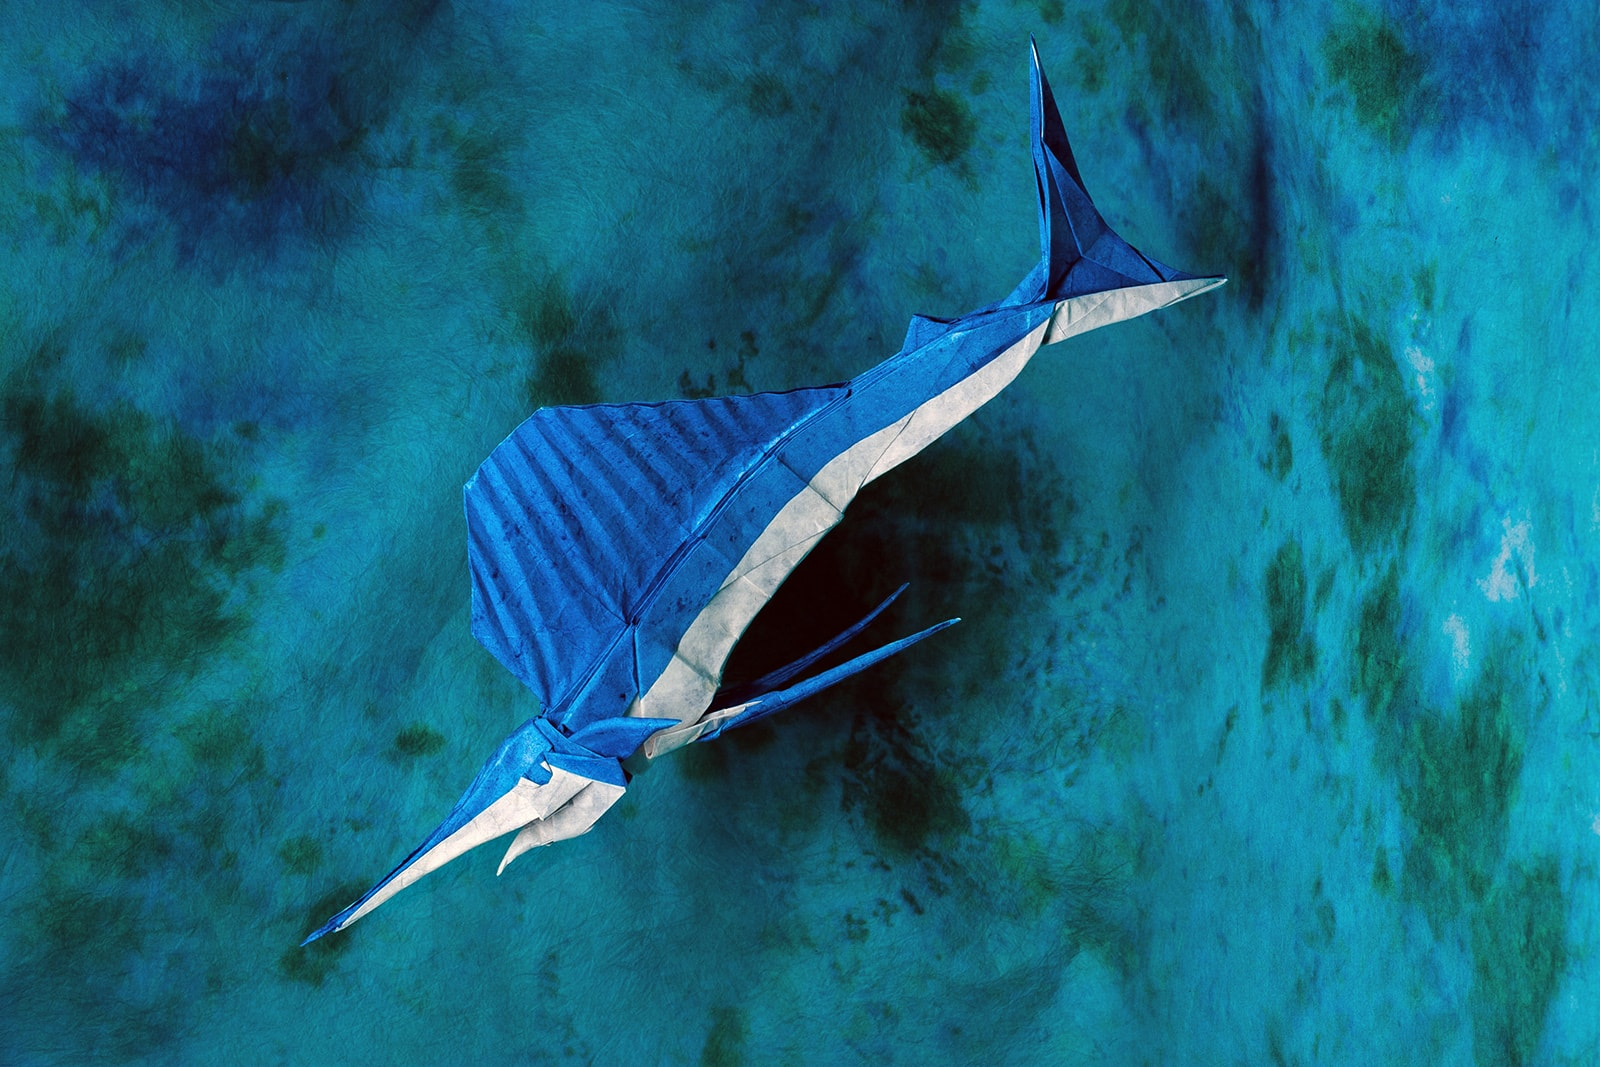 Vog 2 Origami Pdf Dolphinitely Some Of The Best Origami Sea Creatures Ive Seen